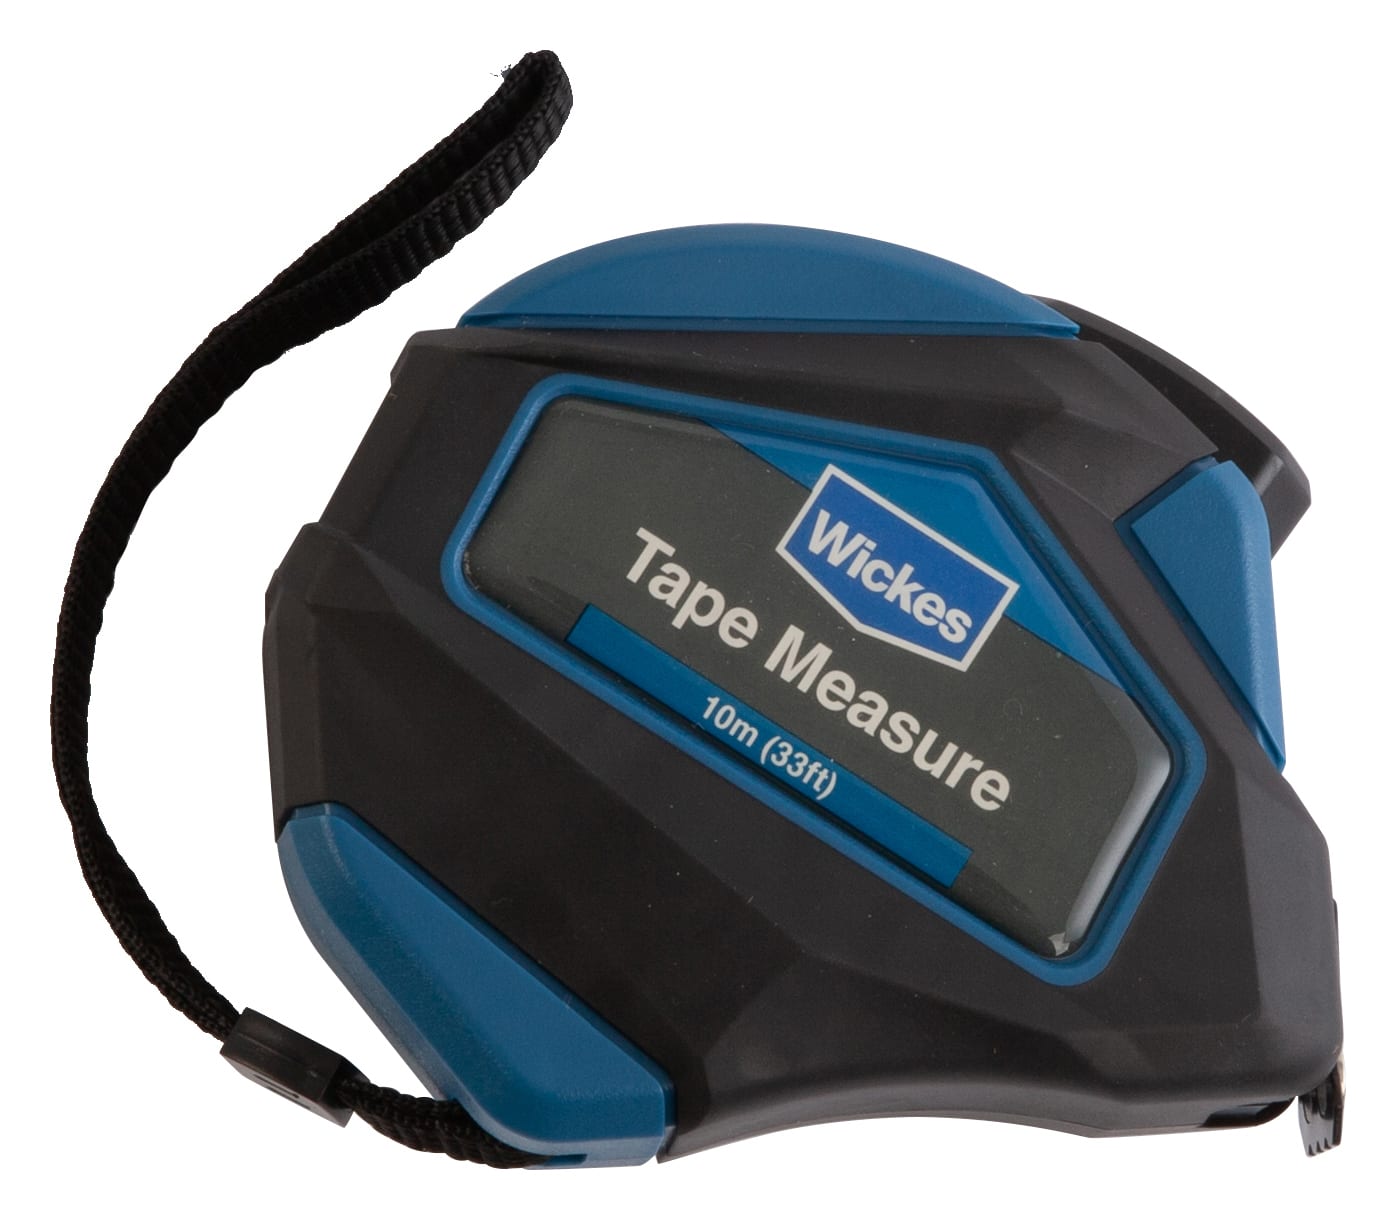 Wickes Rugged Tape Measure - 10m / 32ft